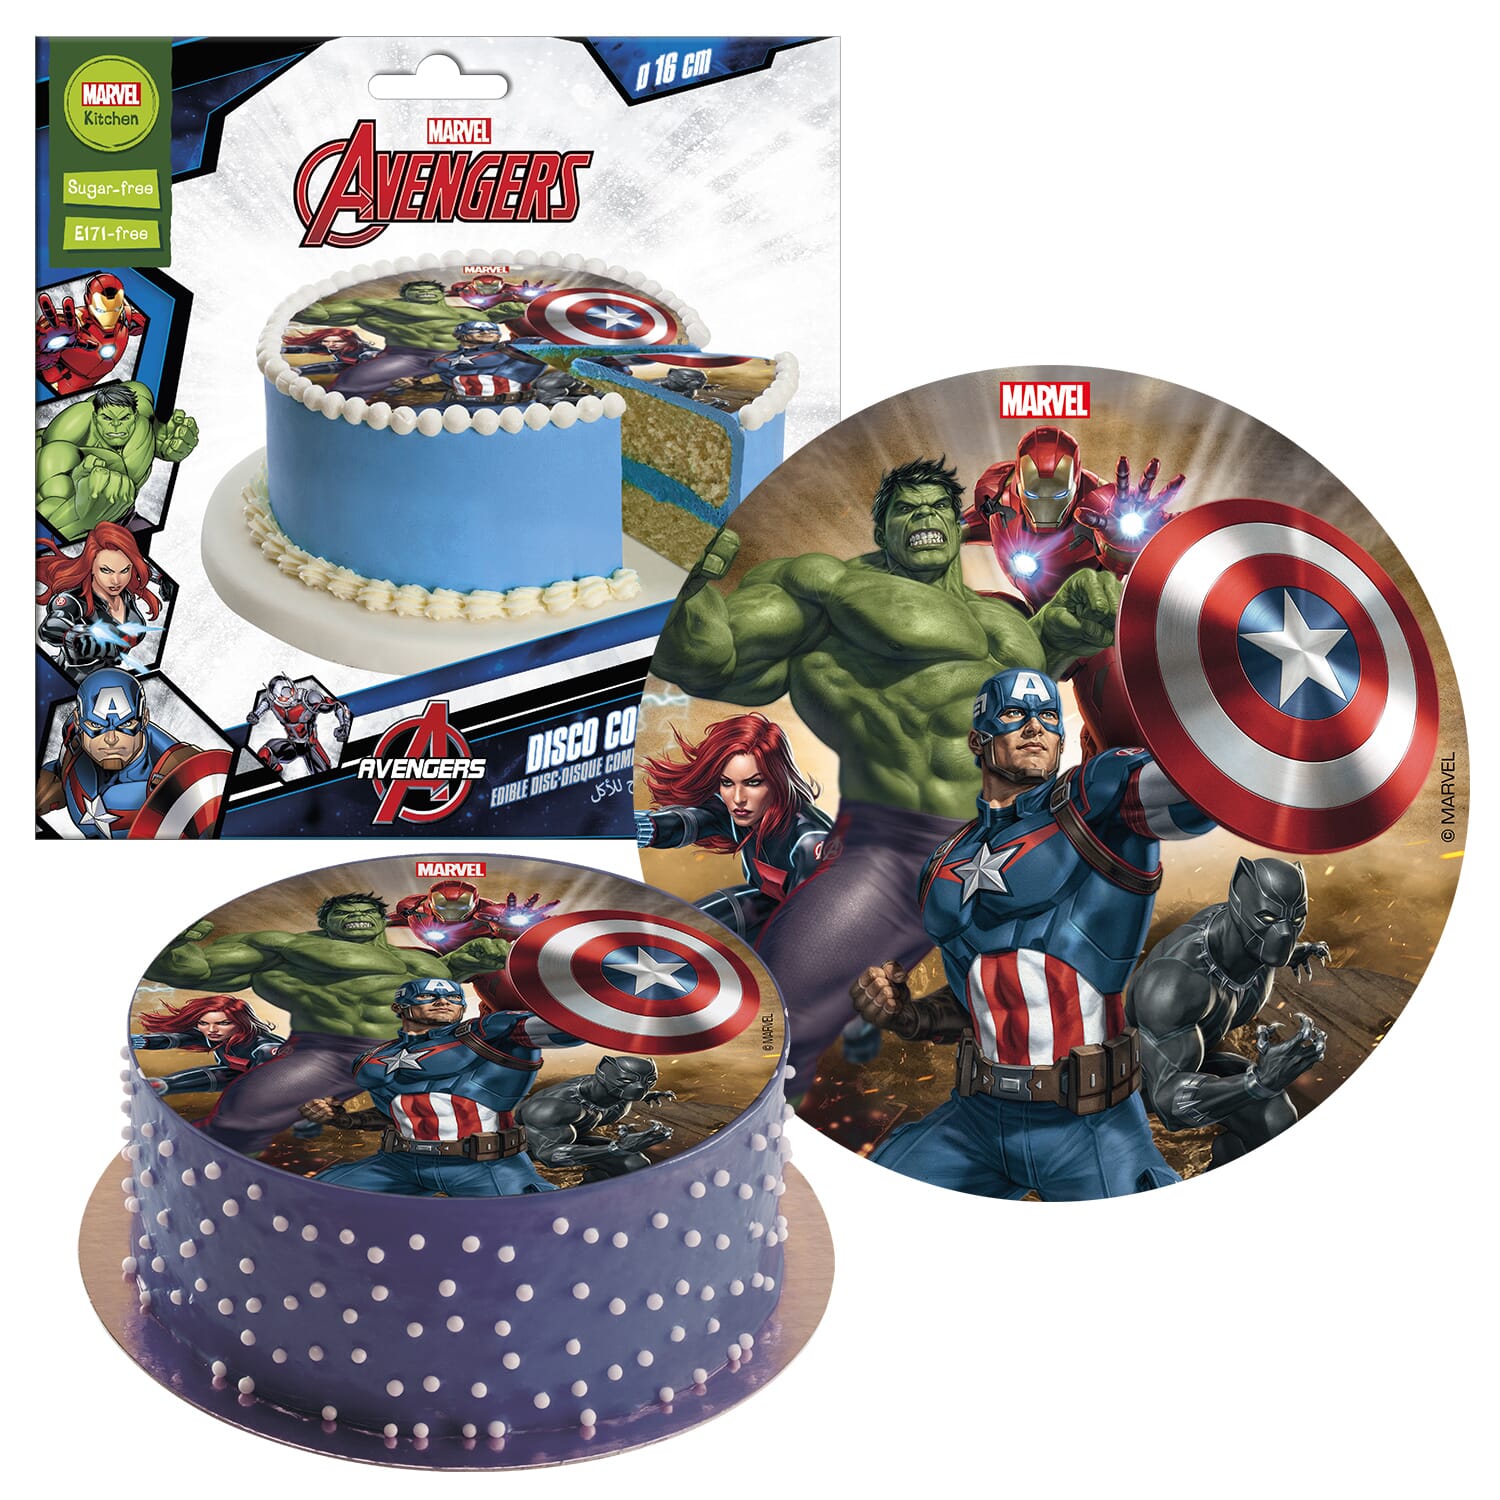 AVENGERS Party Edible Cake Topper Image Frosting Sheet | Edible Party Images